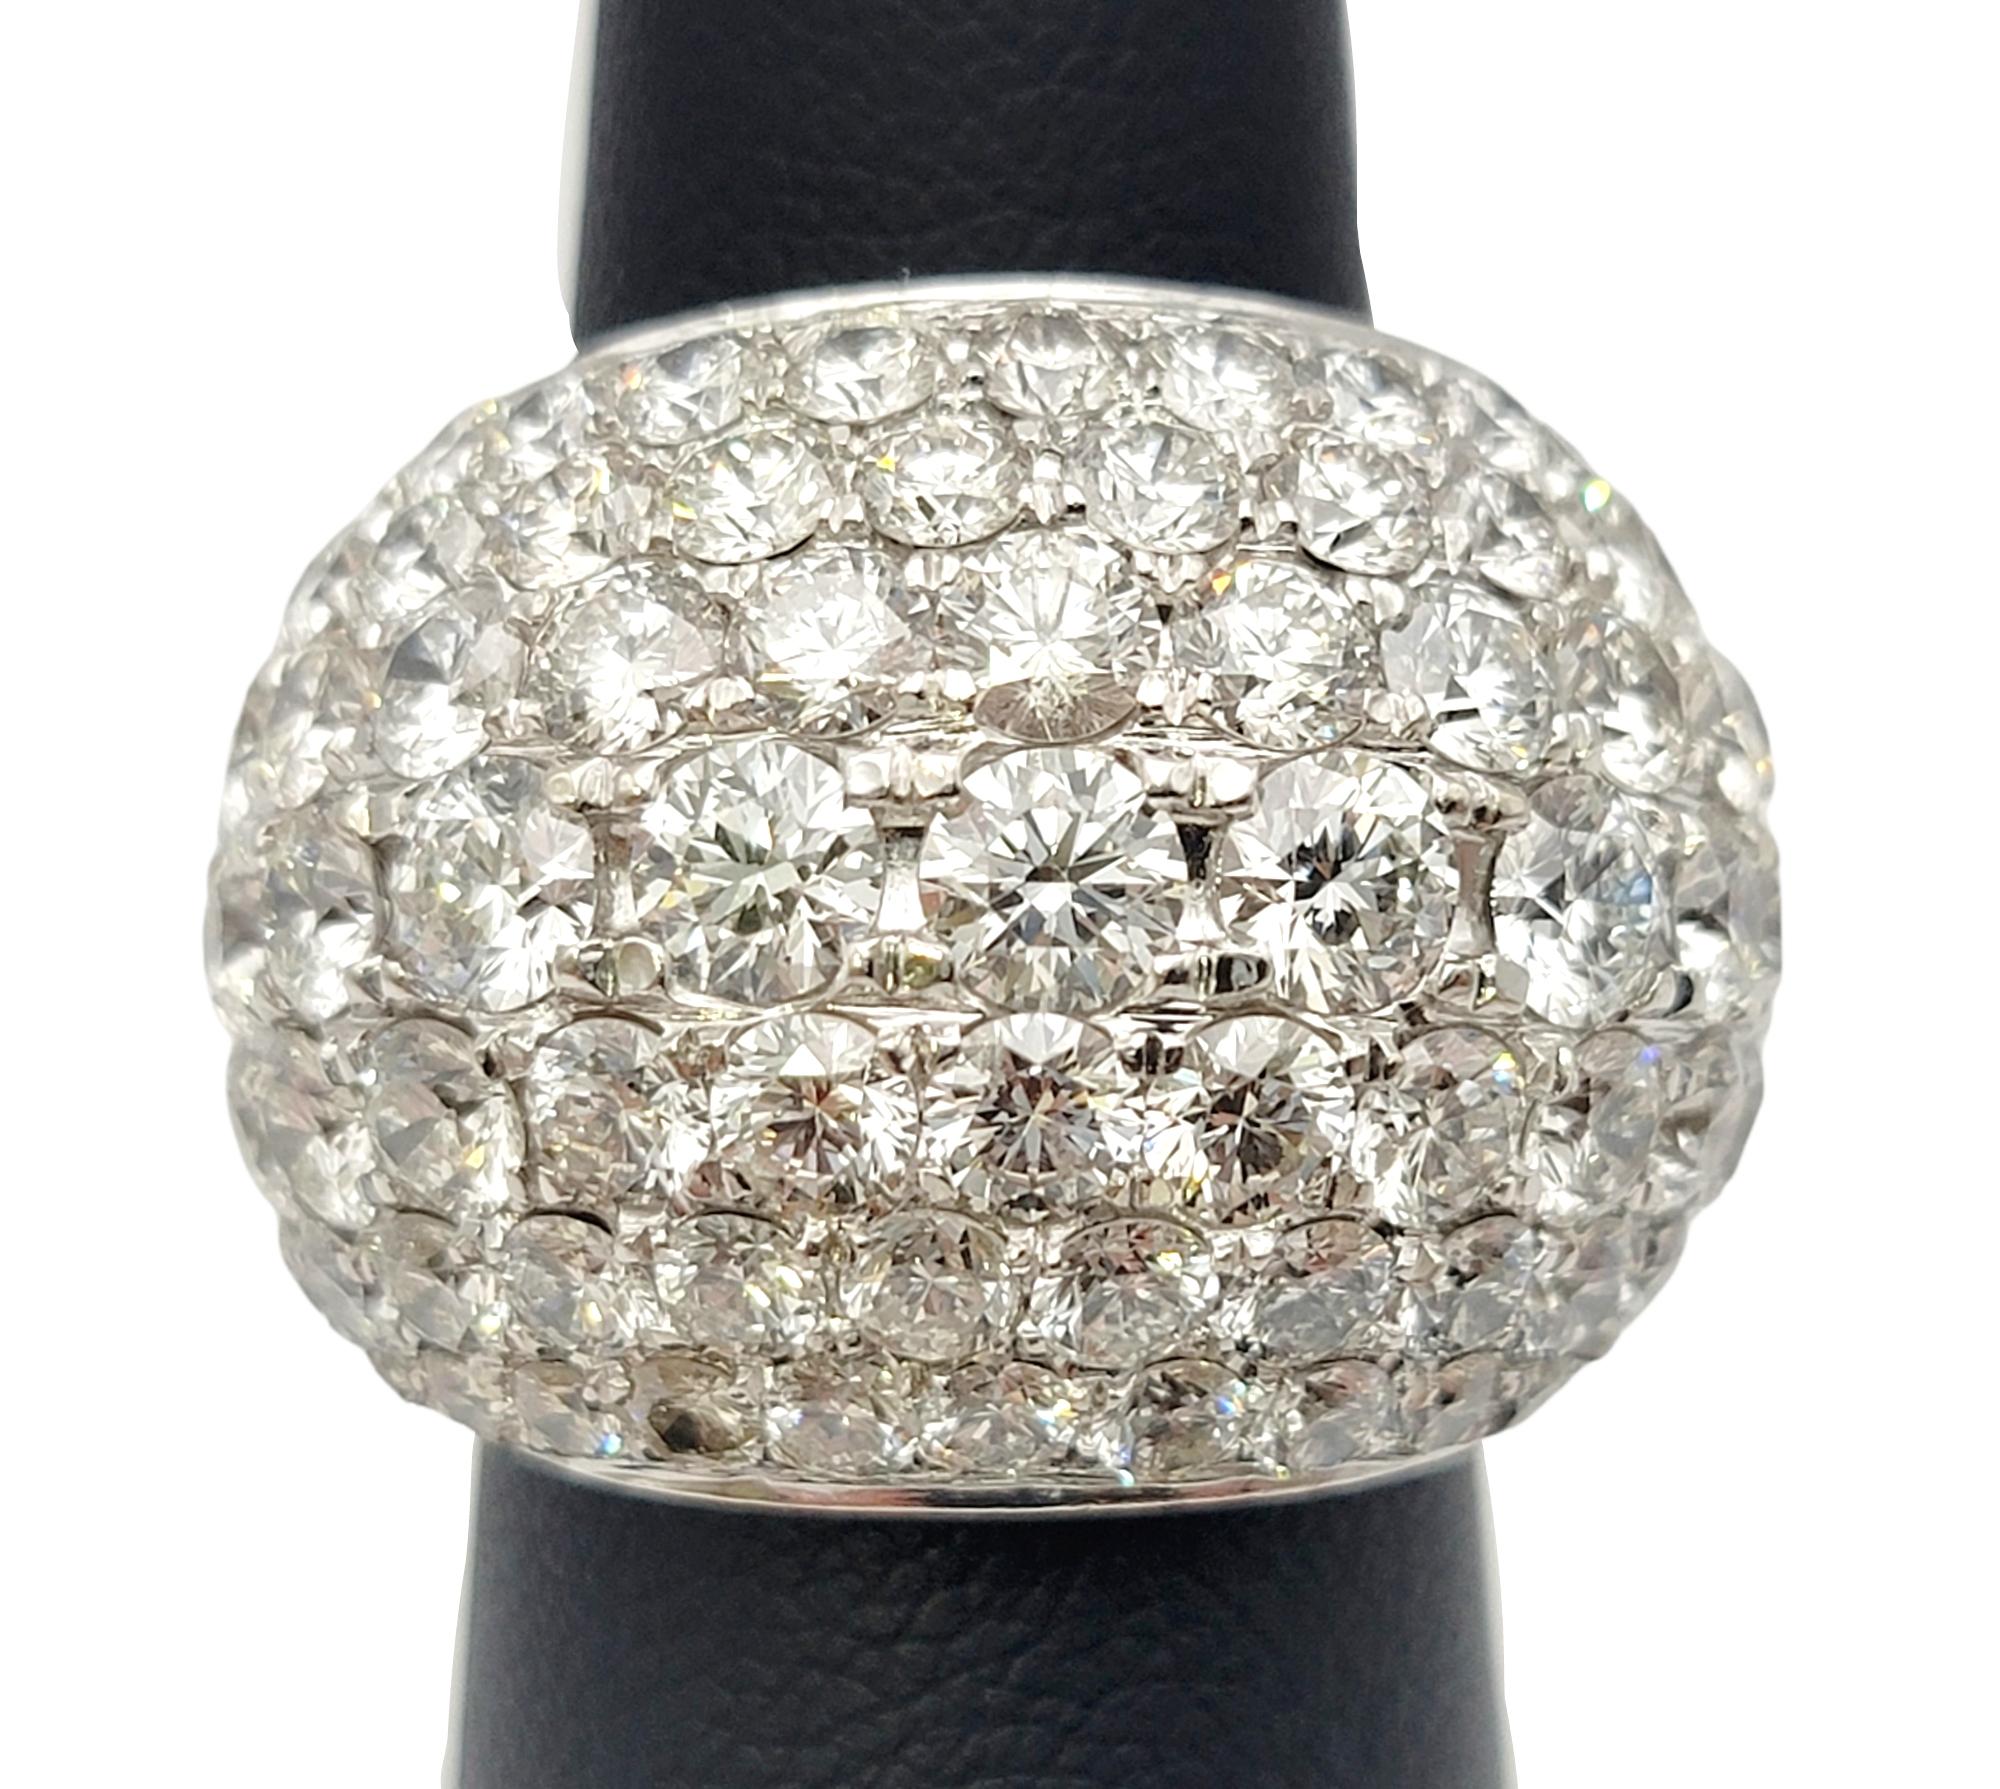 Huge Round Pave Diamond Dome Lollipop Ring in 14 Karat White Gold 9 Carats Total For Sale 3